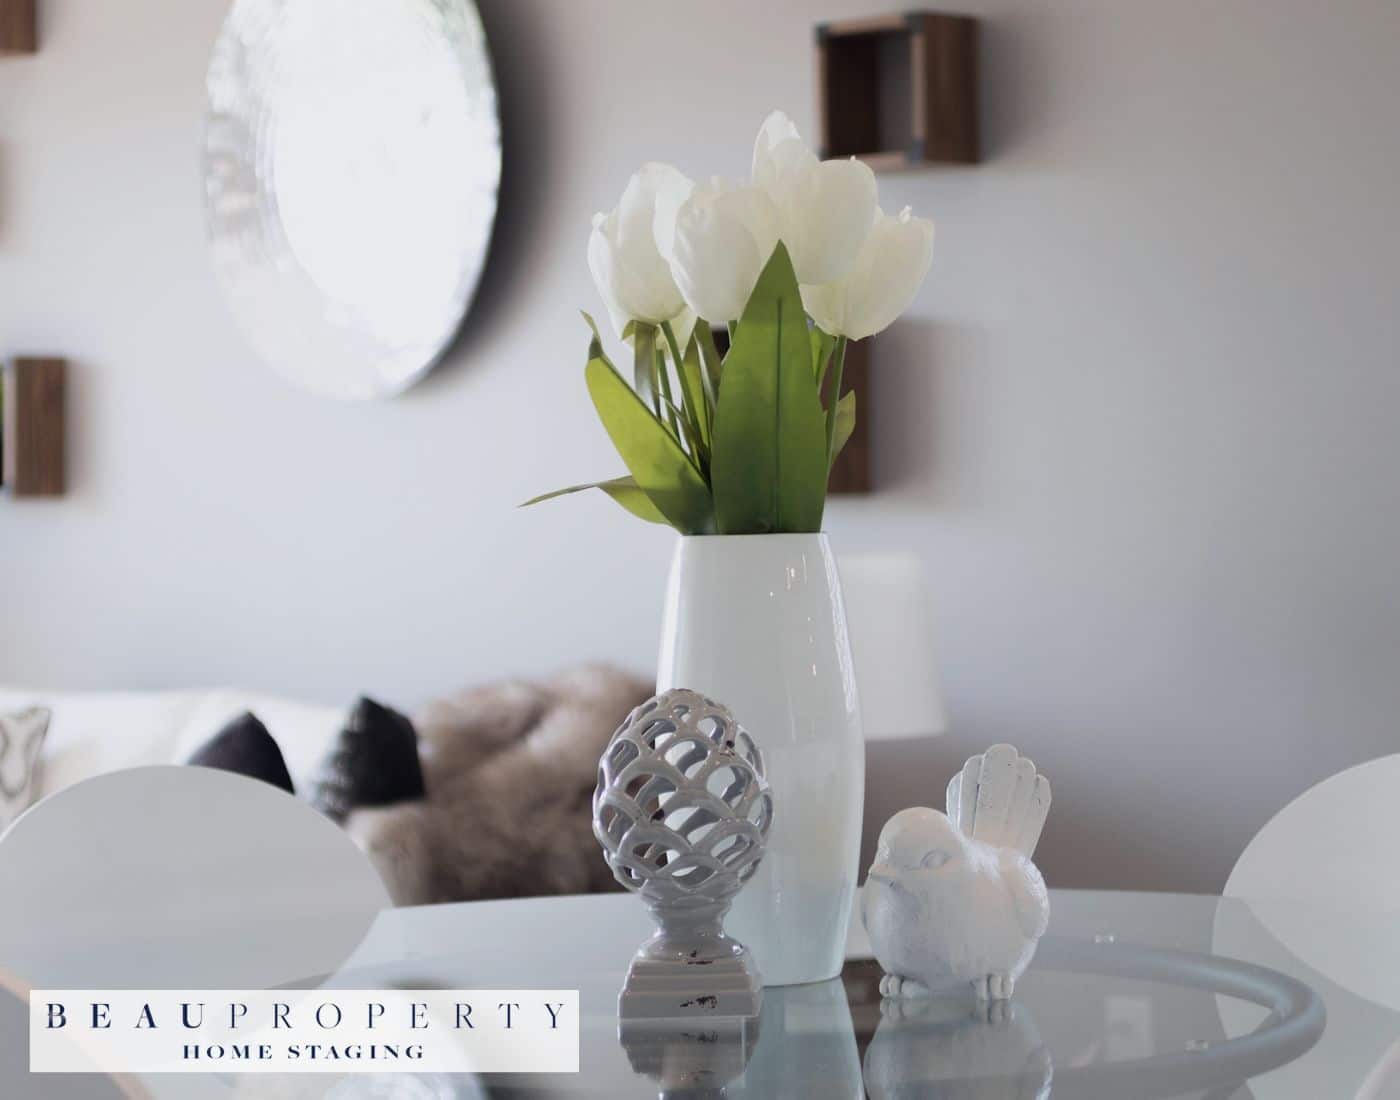 Discover 20 Money-Saving Tips for Budget-Friendly Home Staging and maximize your property's value in today's competitive real estate market.